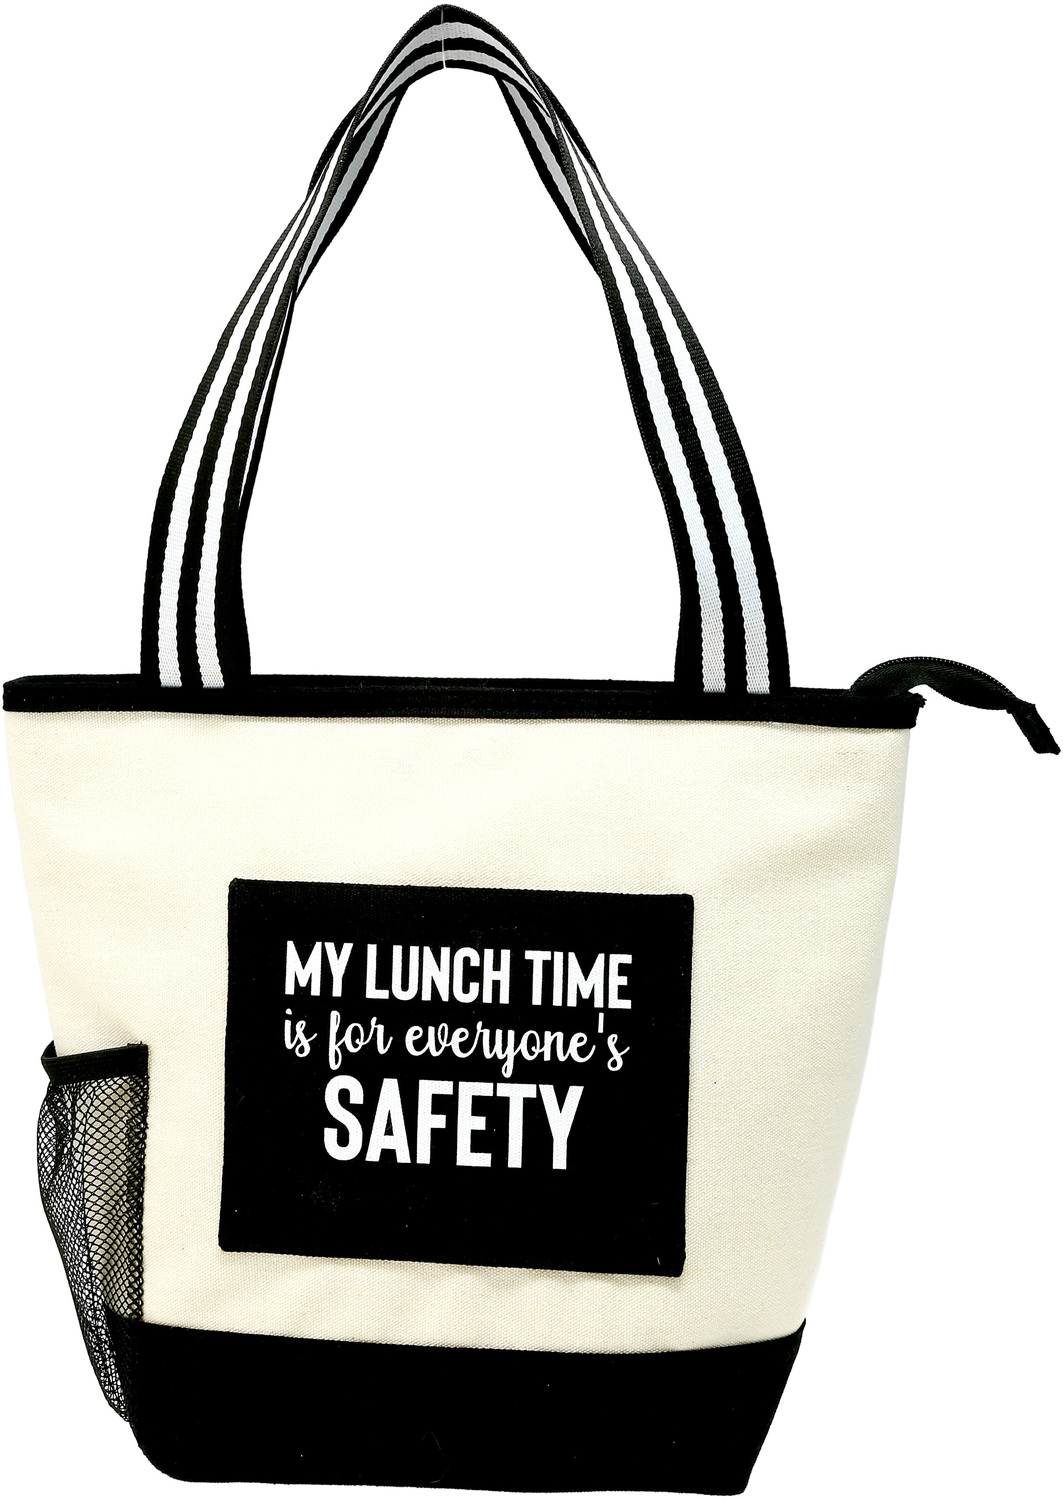 My Lunch Time by Check Me Out - My Lunch Time - Insulated Canvas Lunch Tote